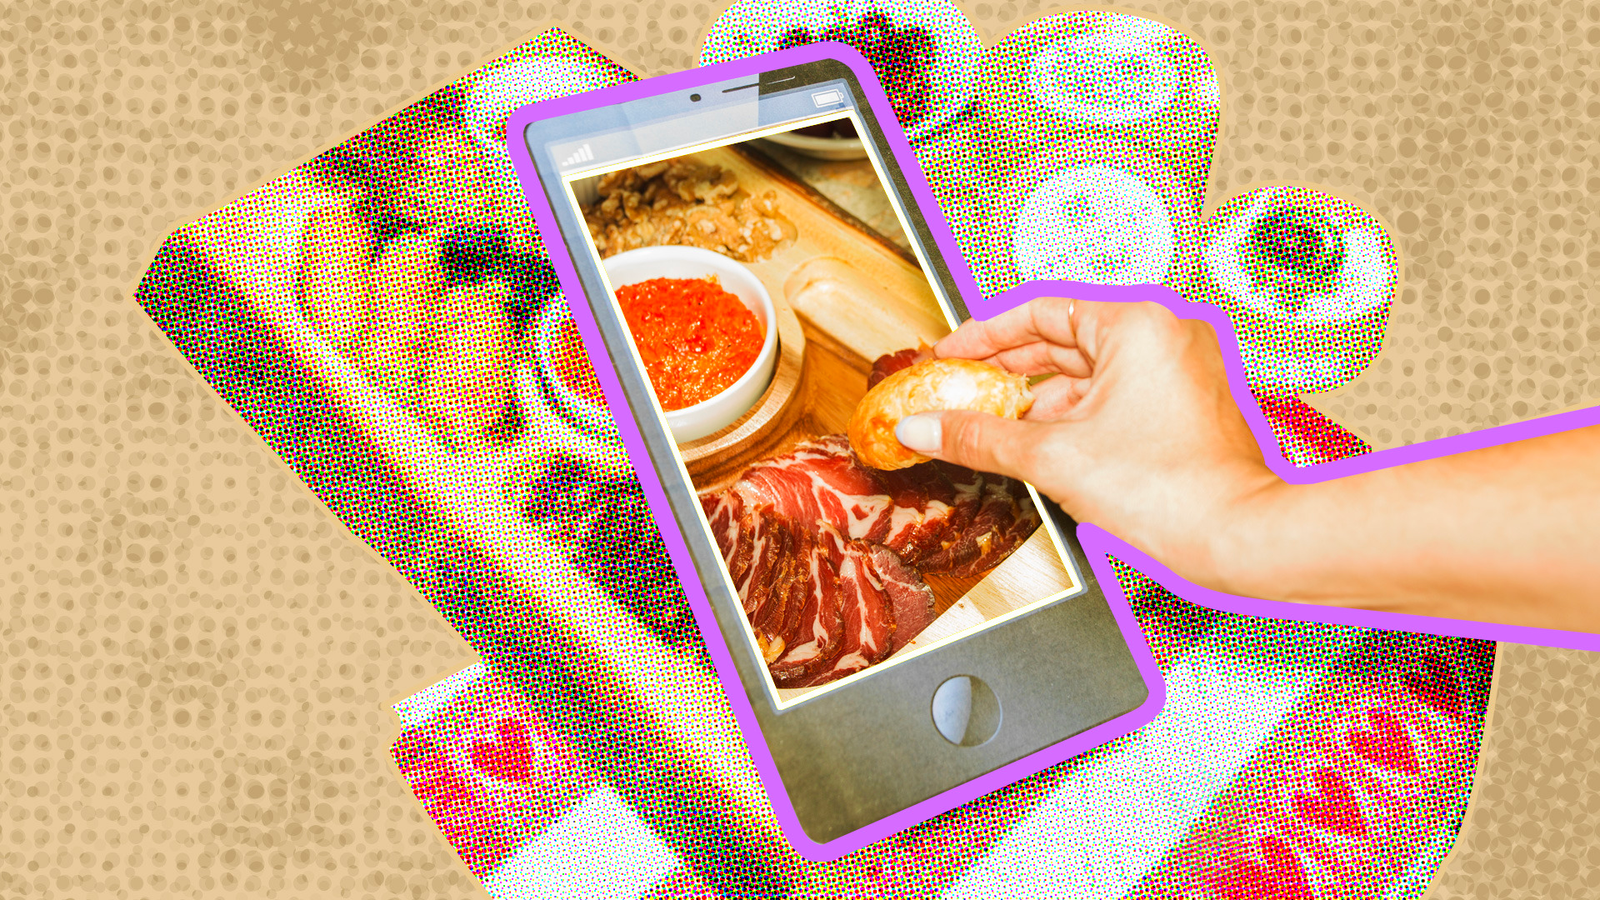 Hero image showing hand reaching through phone to sample food from another dimension